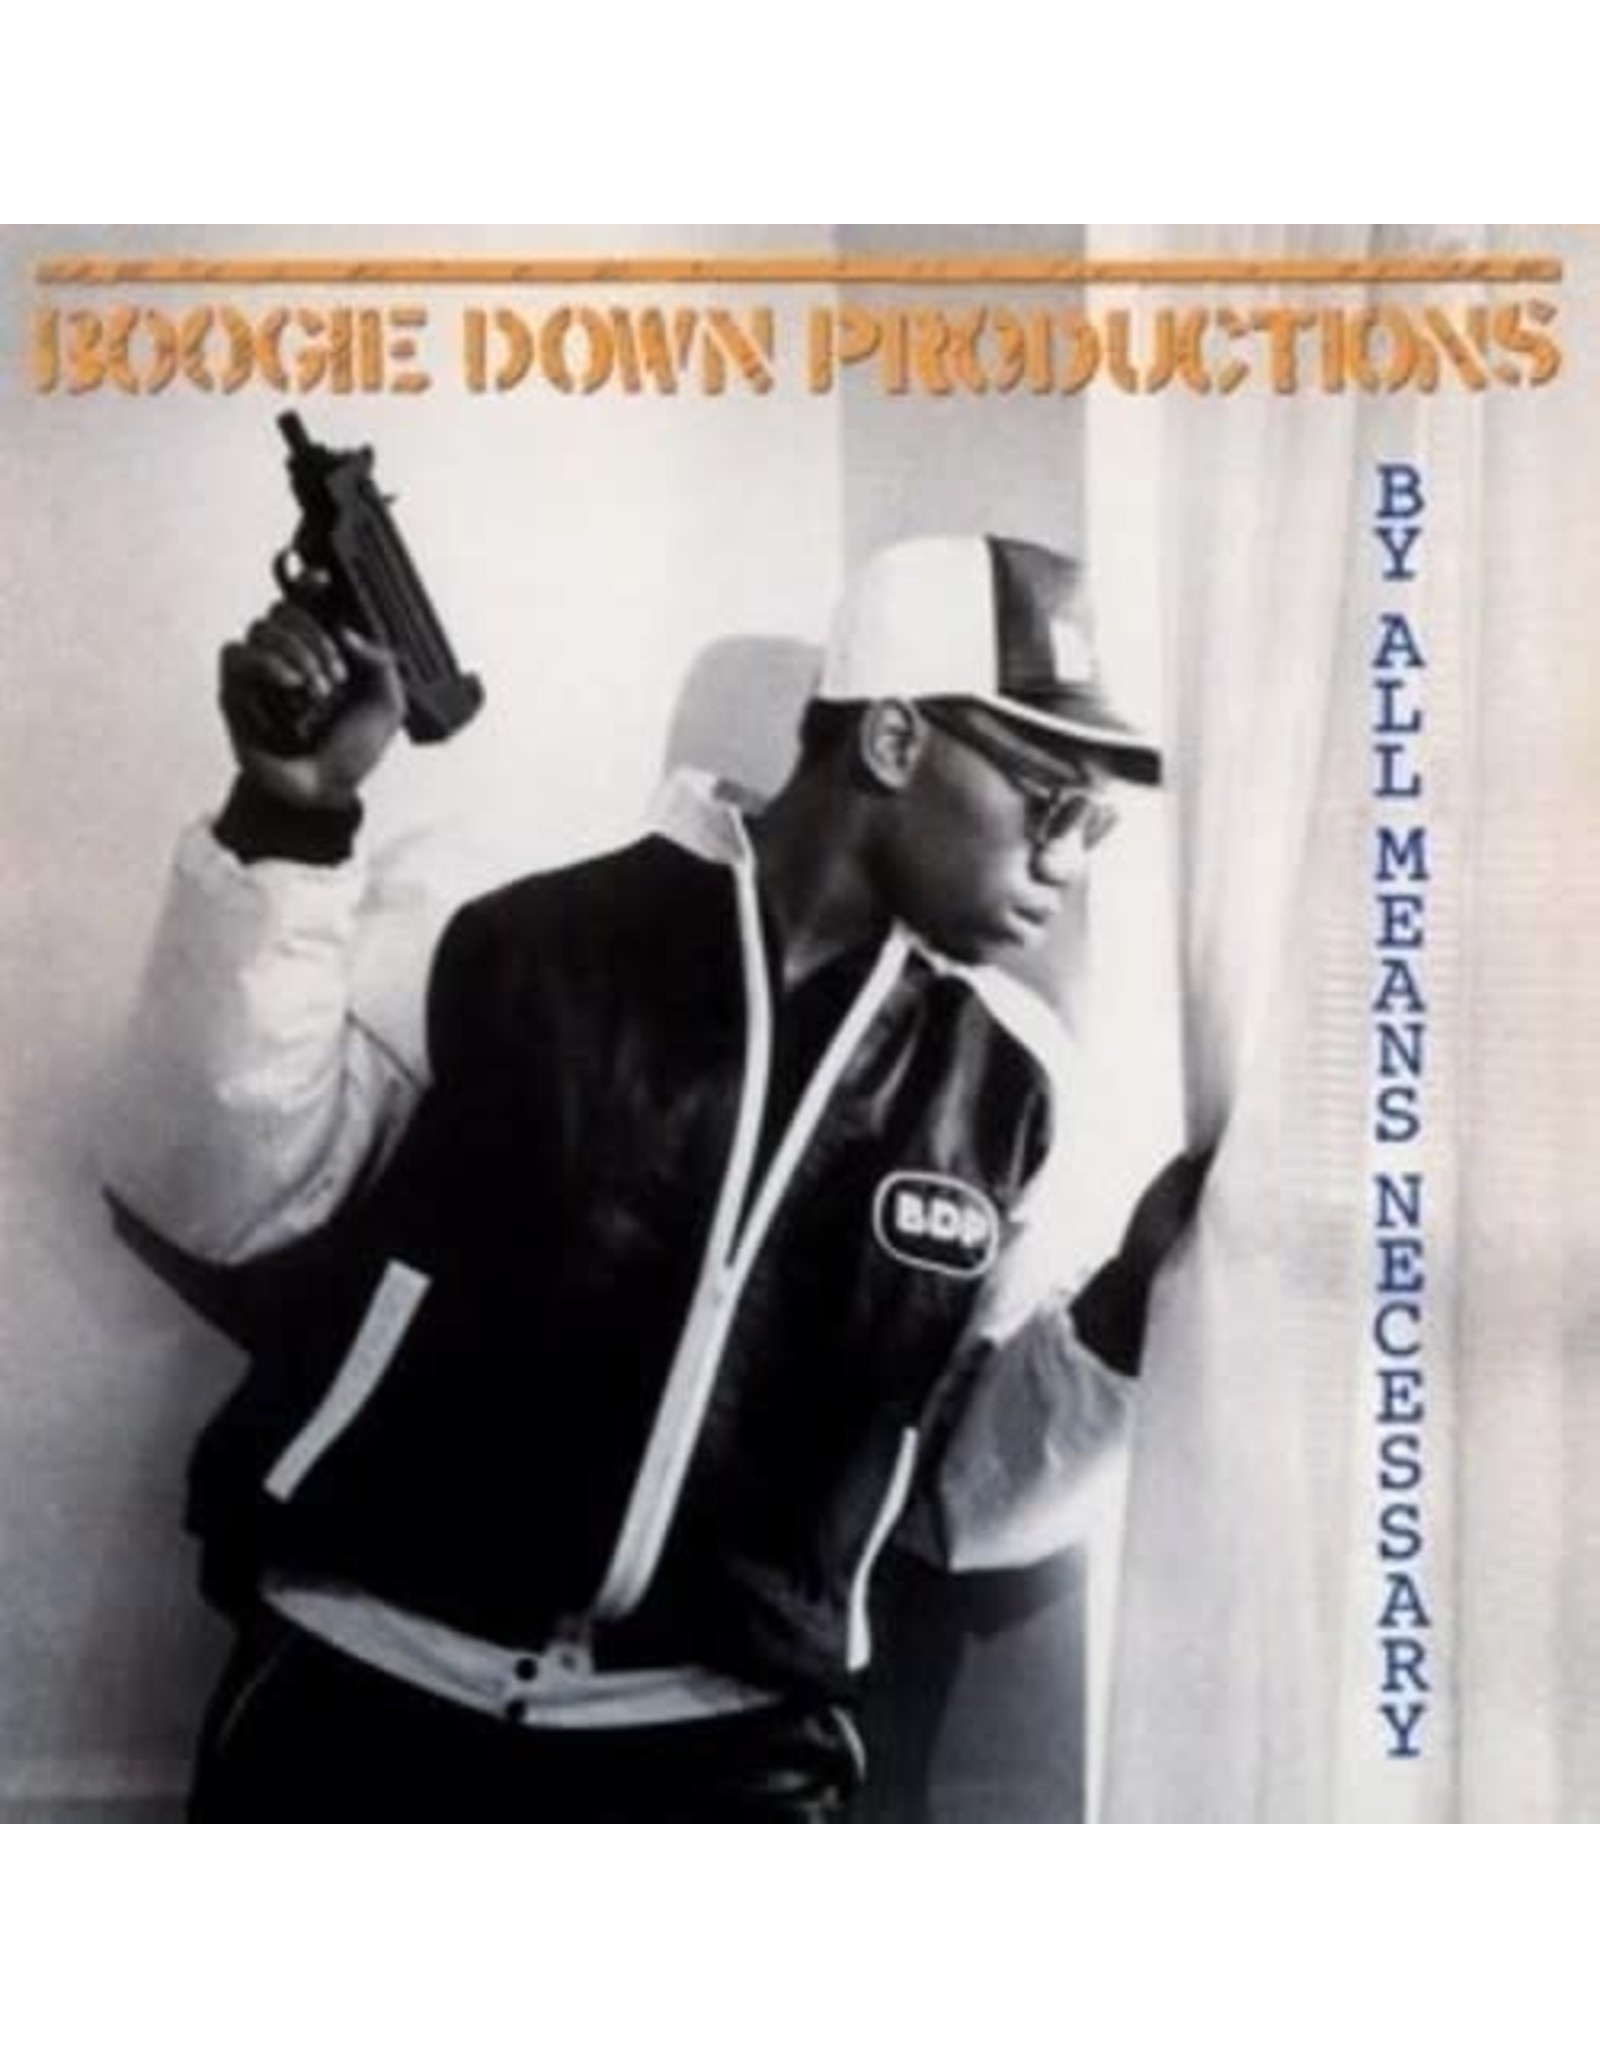 New Vinyl Boogie Down Productions - By All Means Necessary (180g) [Import] LP